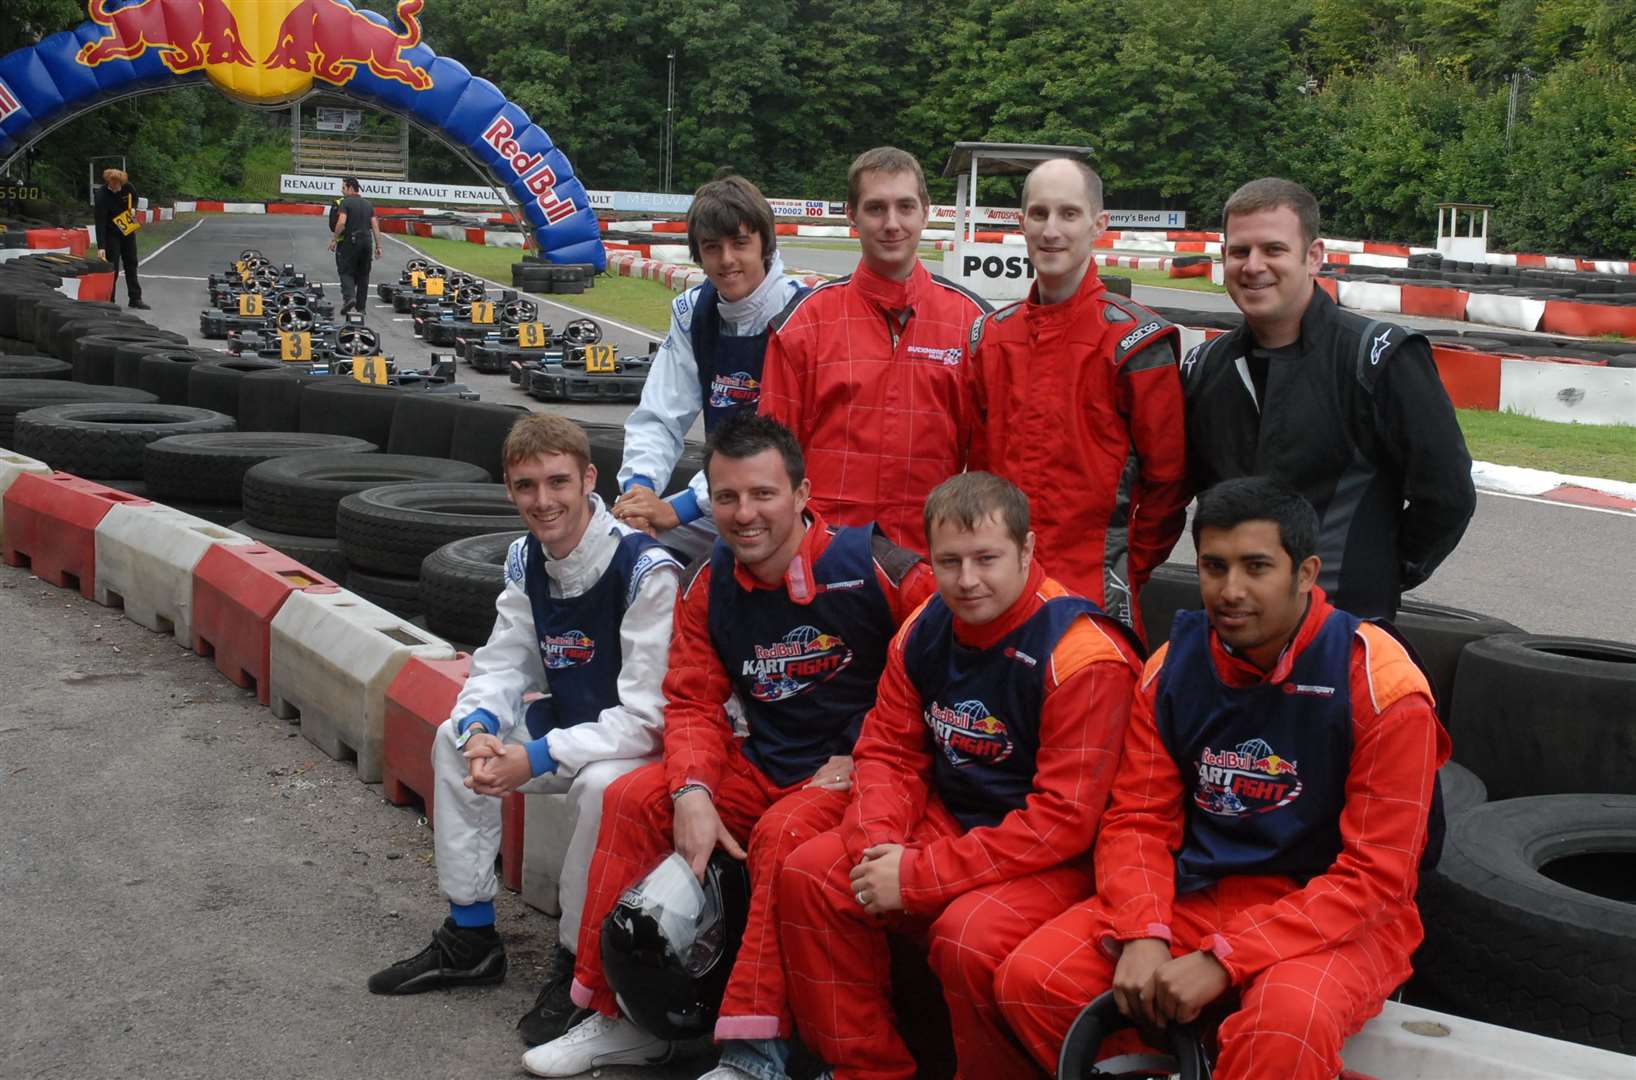 The Red Bull Kart Fight south east qualifying round was held at Buckmore in August 2011